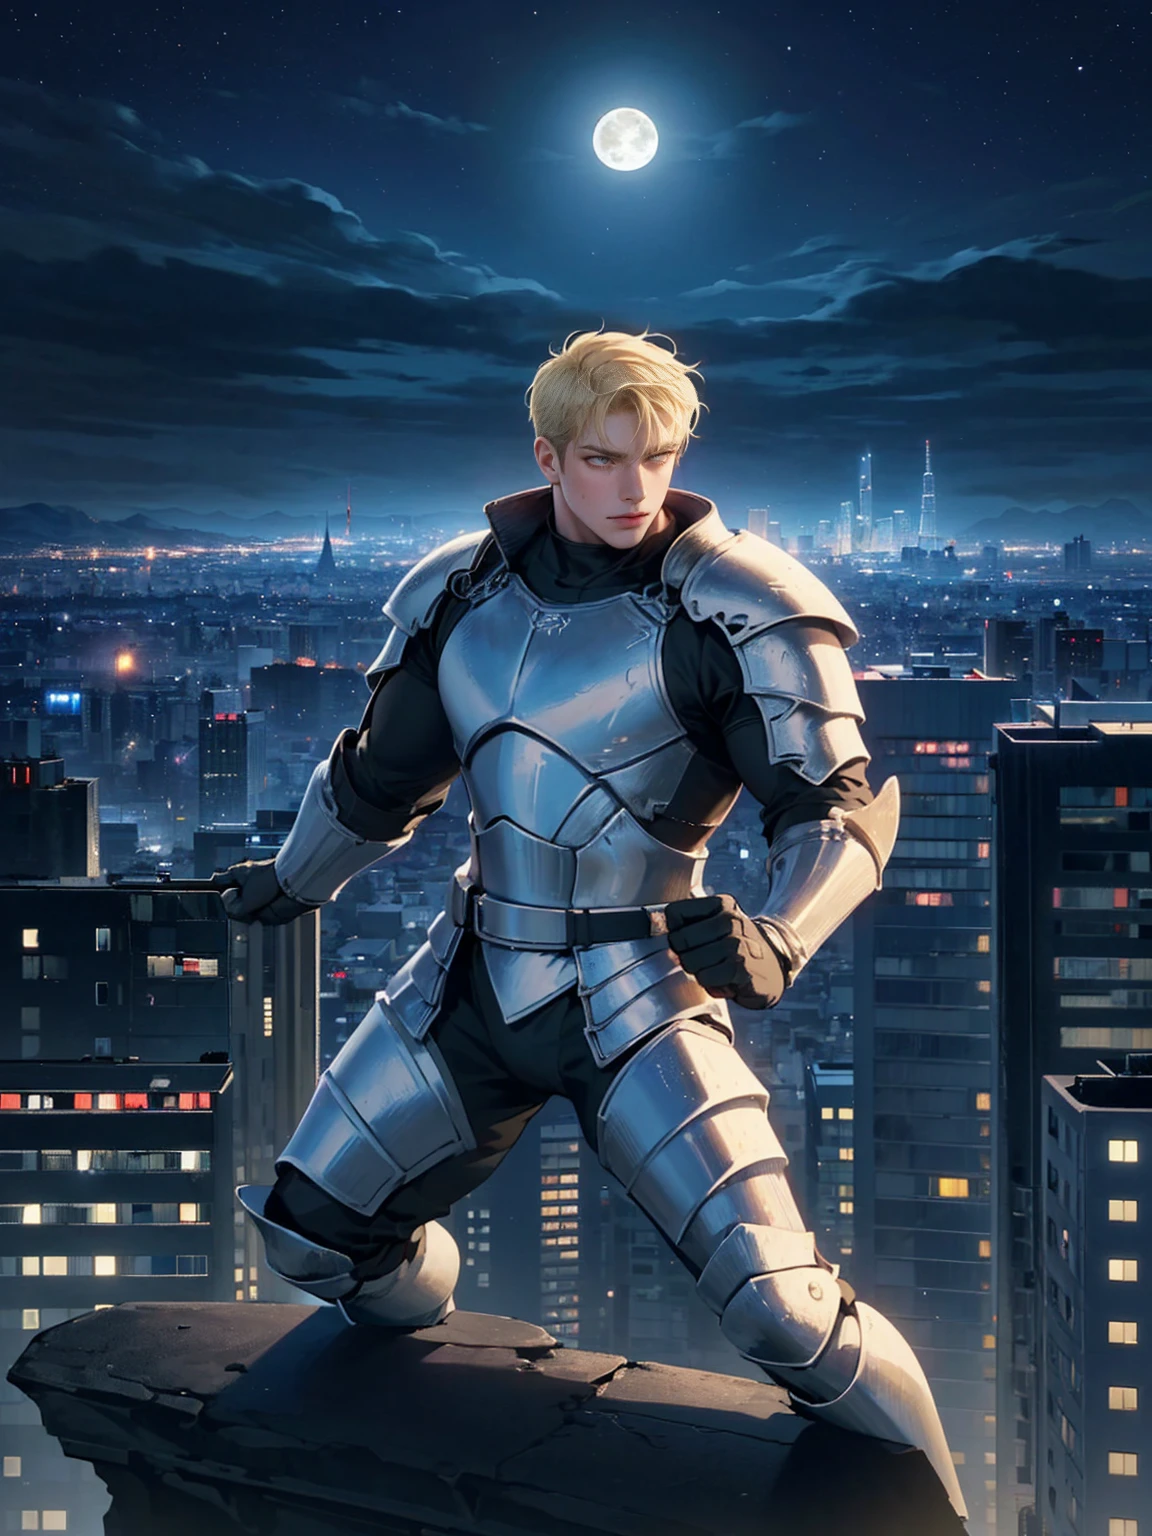 (masterpiece, 4K resolution, Surreal, Very detailed), (Knight theme, Charming, There was a boy at the top of the city, Knight in silver armor, He's a superhero), [ ((20 years), (Blonde short hair:1.2), whole body, (Yellow eyes:1.2), ((Fighting Stance),demonstration of strength), ((Sandy urban environment):0.8)| (city View, night, Dynamic Lighting), (Full Moon))